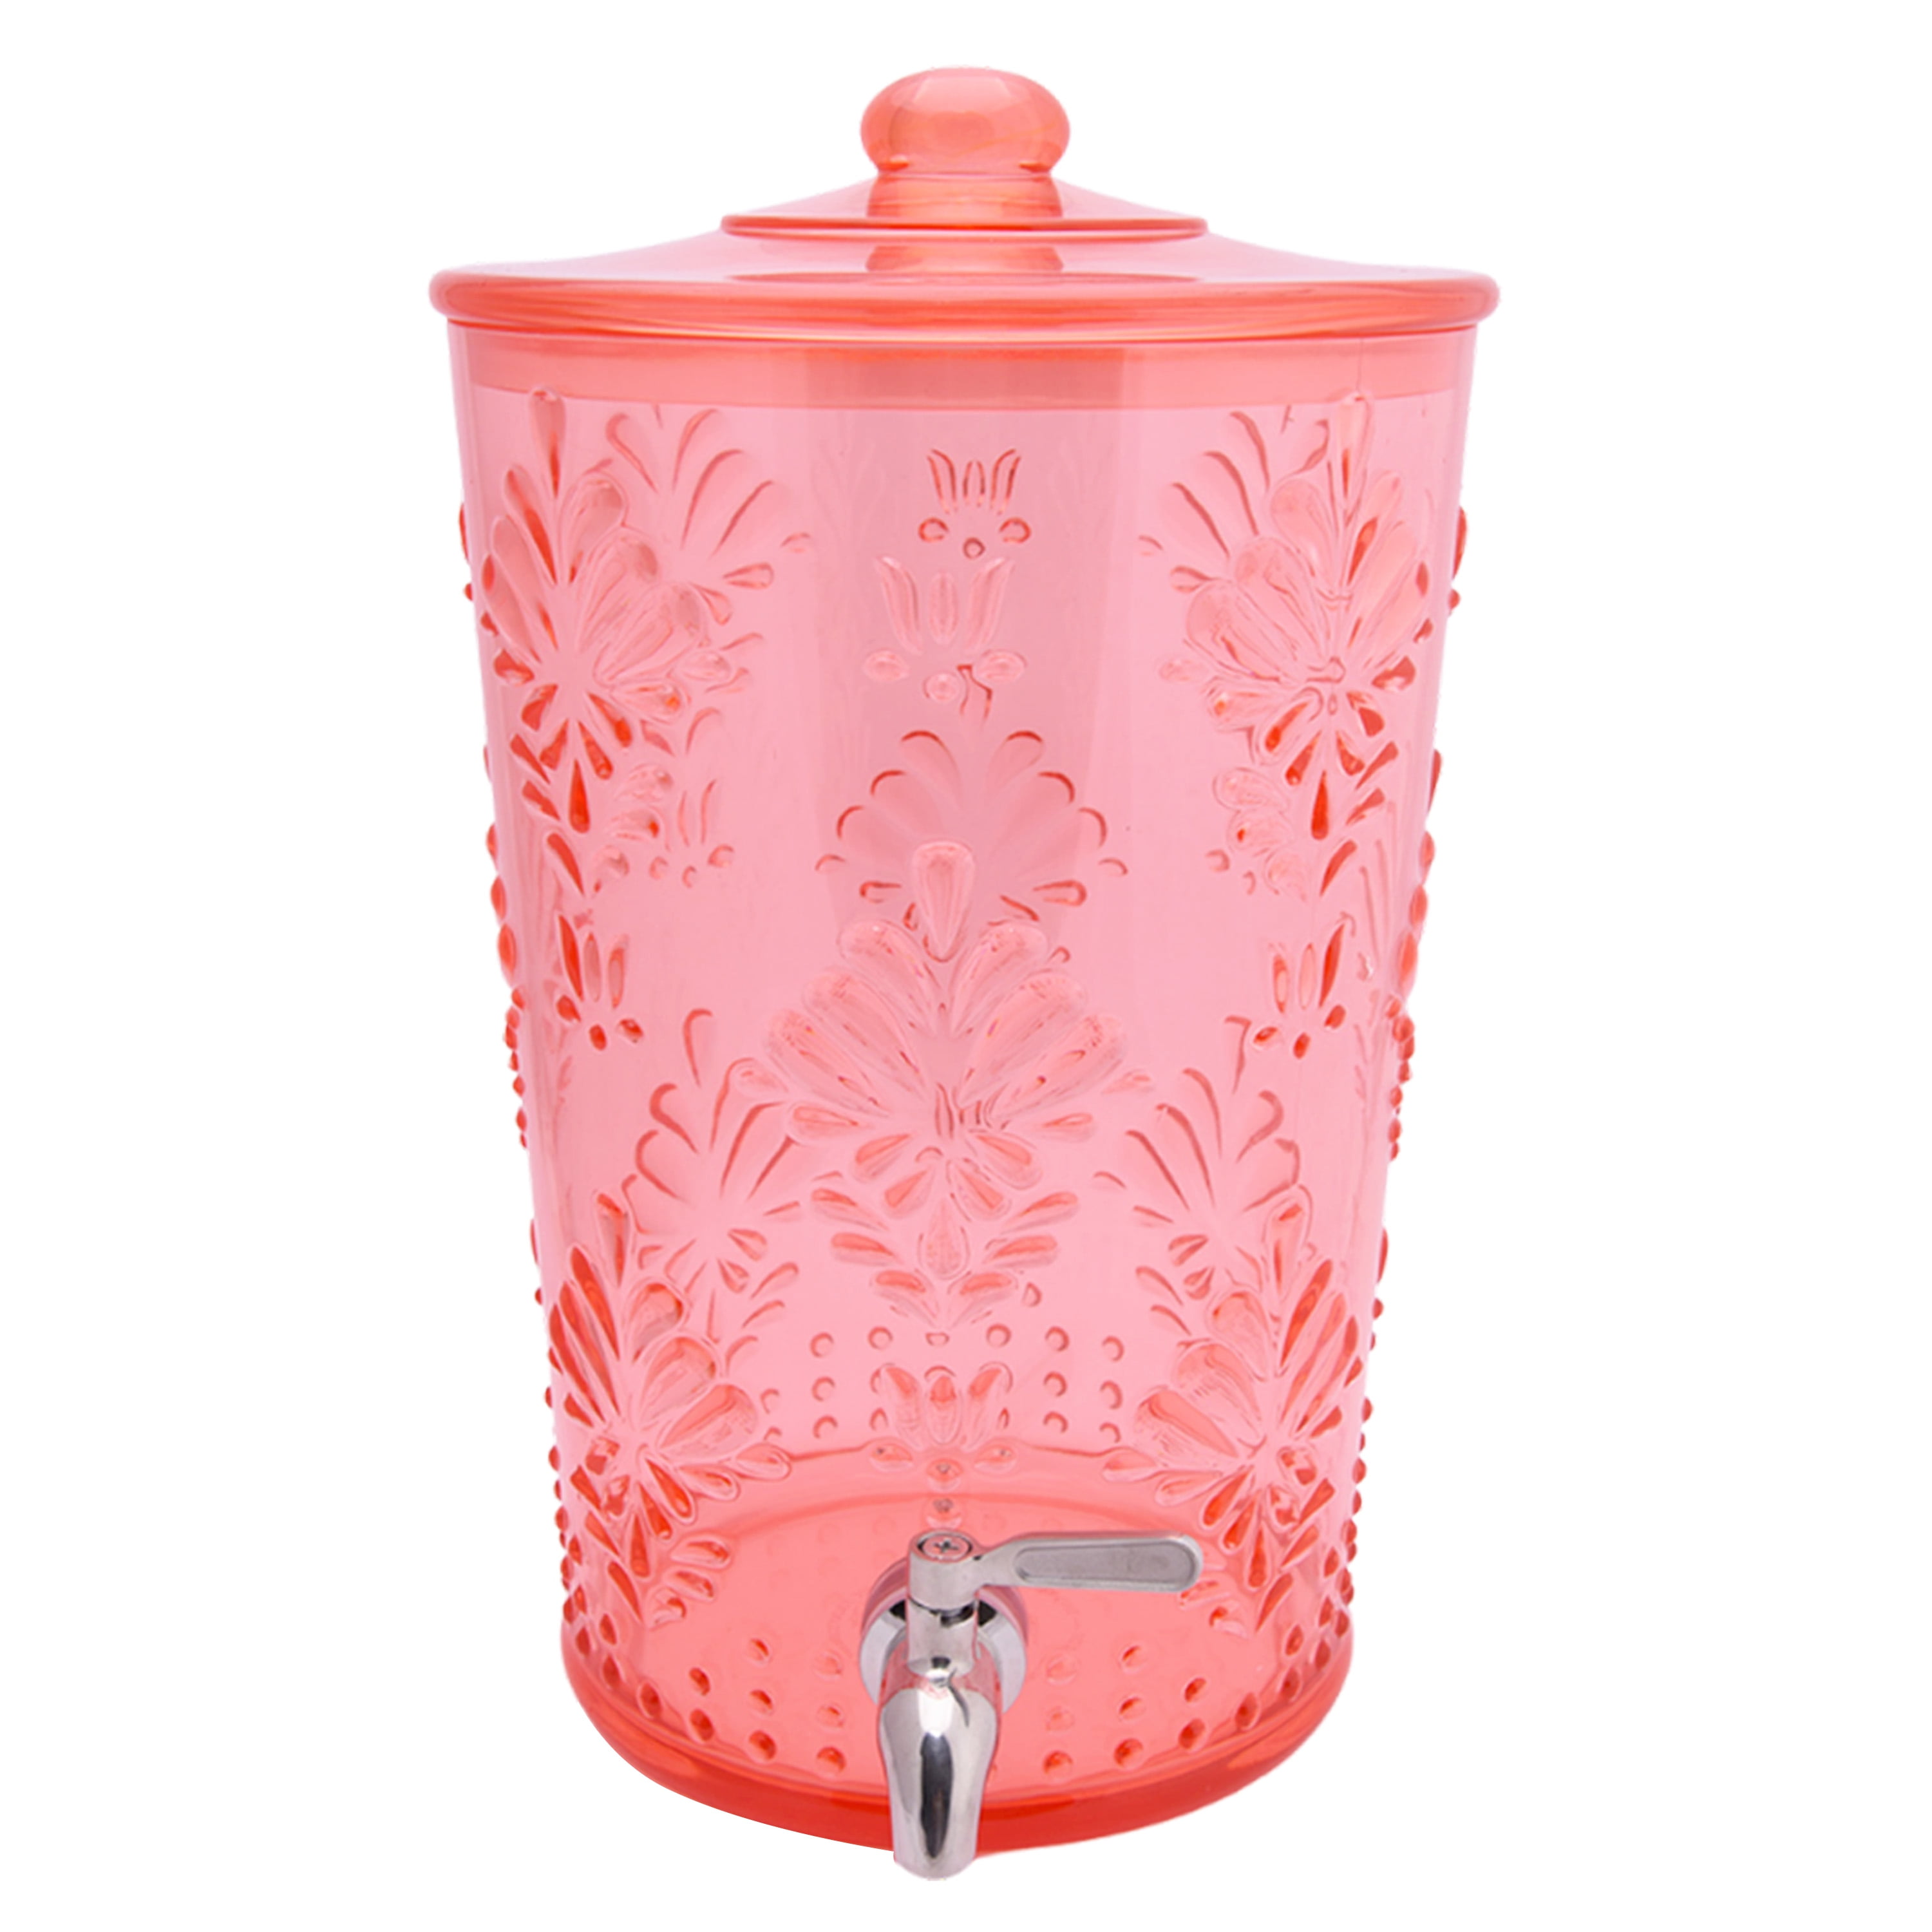 The Pioneer Woman Simple Homemade Goodness Drink Dispenser Set with Ice Bucket